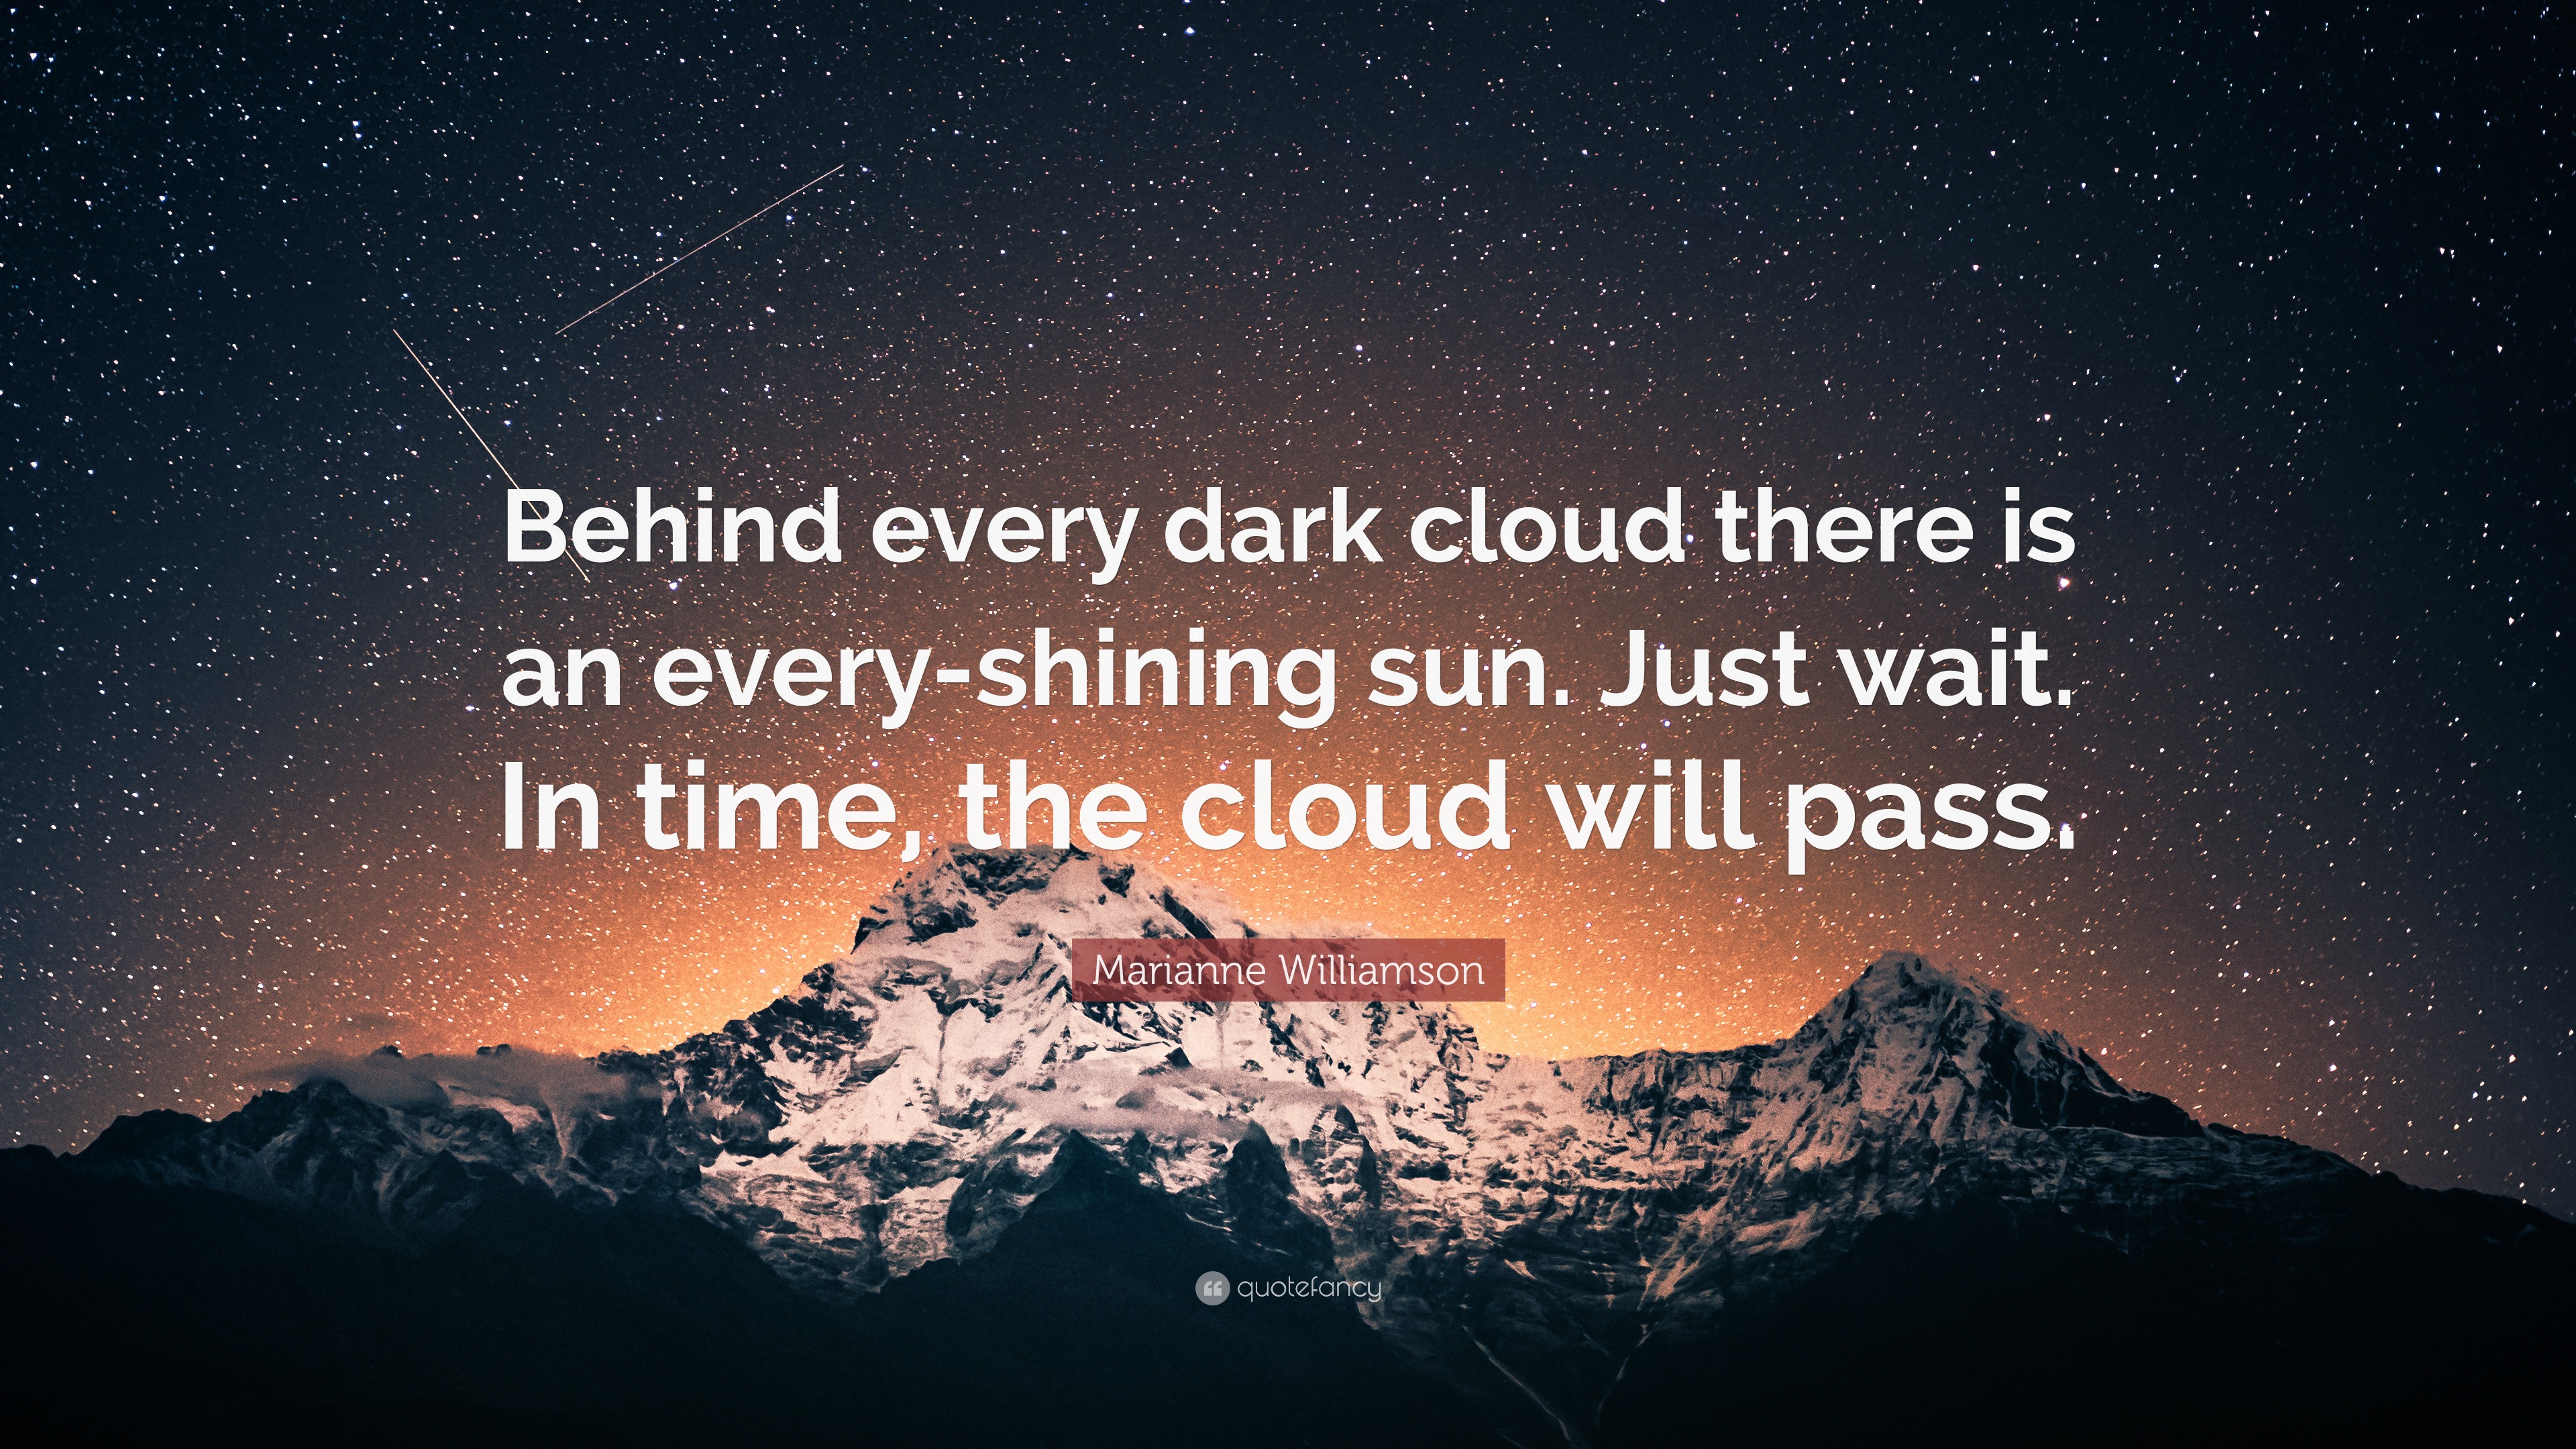 Marianne Williamson Quote Behind Every Dark Cloud There Is An Every Shining Sun Just Wait In